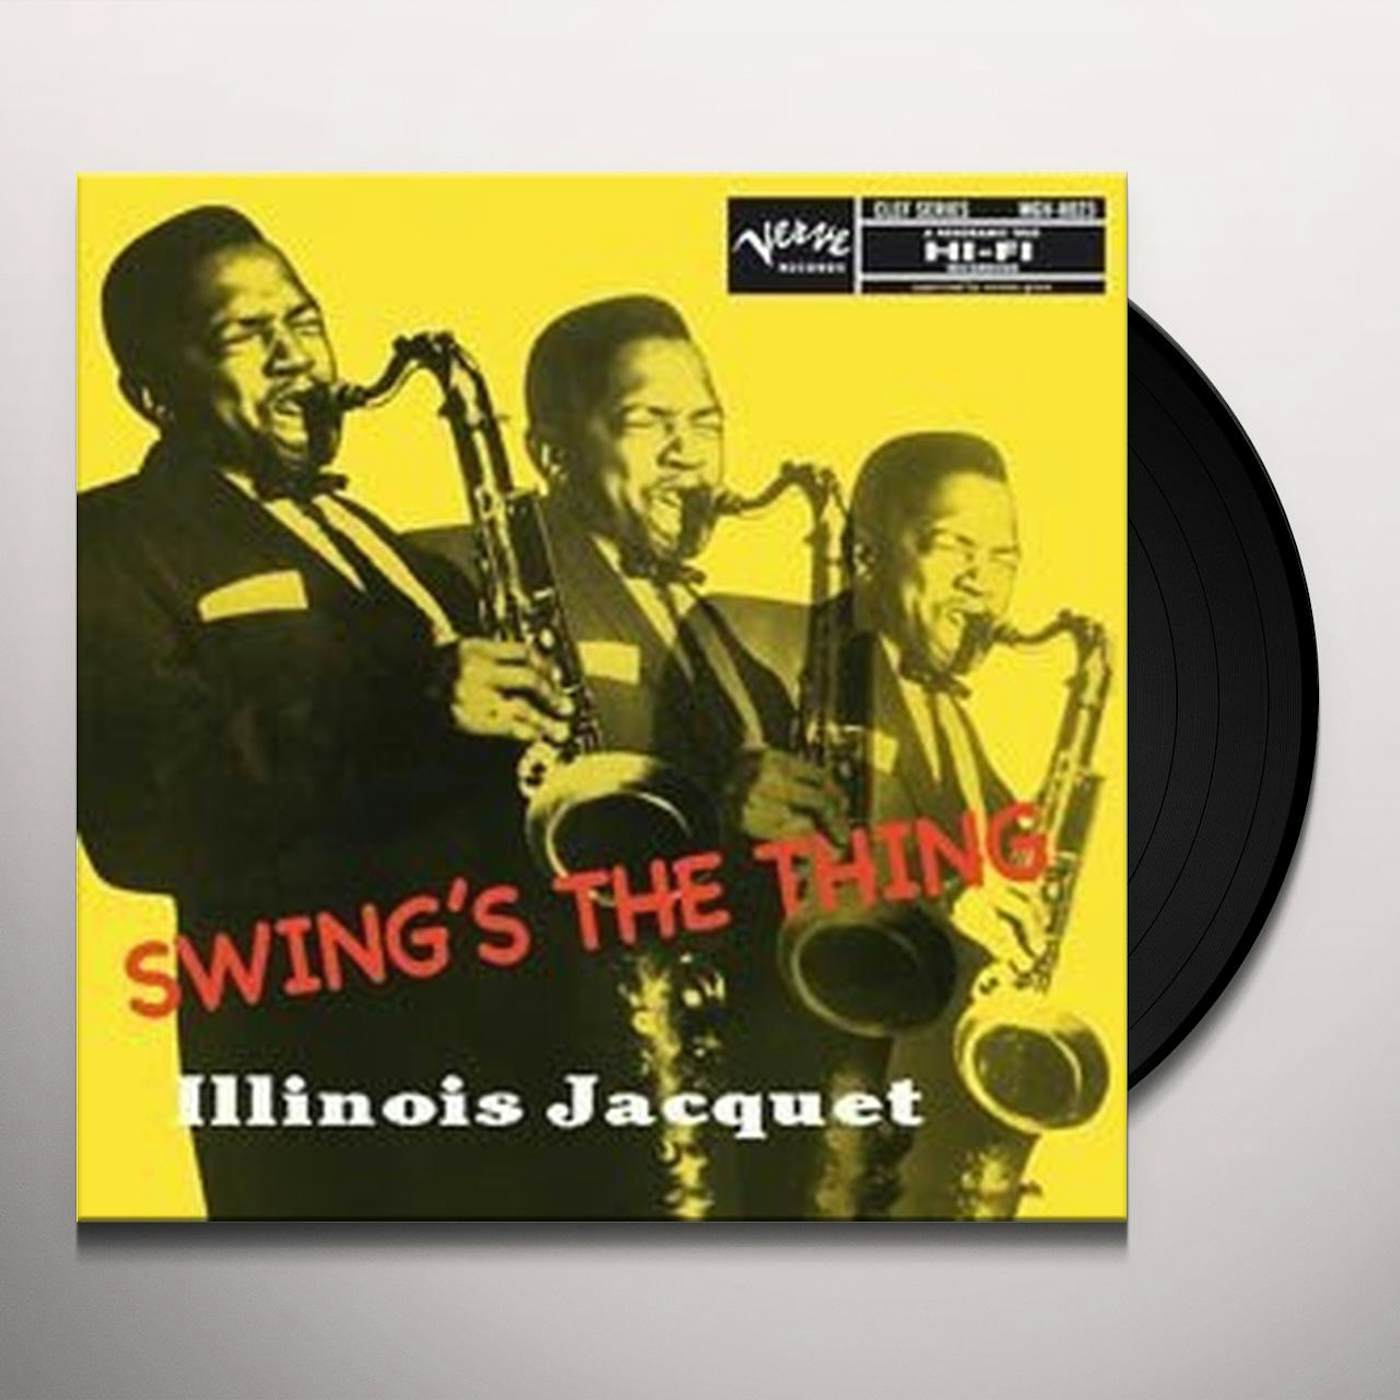 Illinois Jacquet Swing's The Thing Vinyl Record